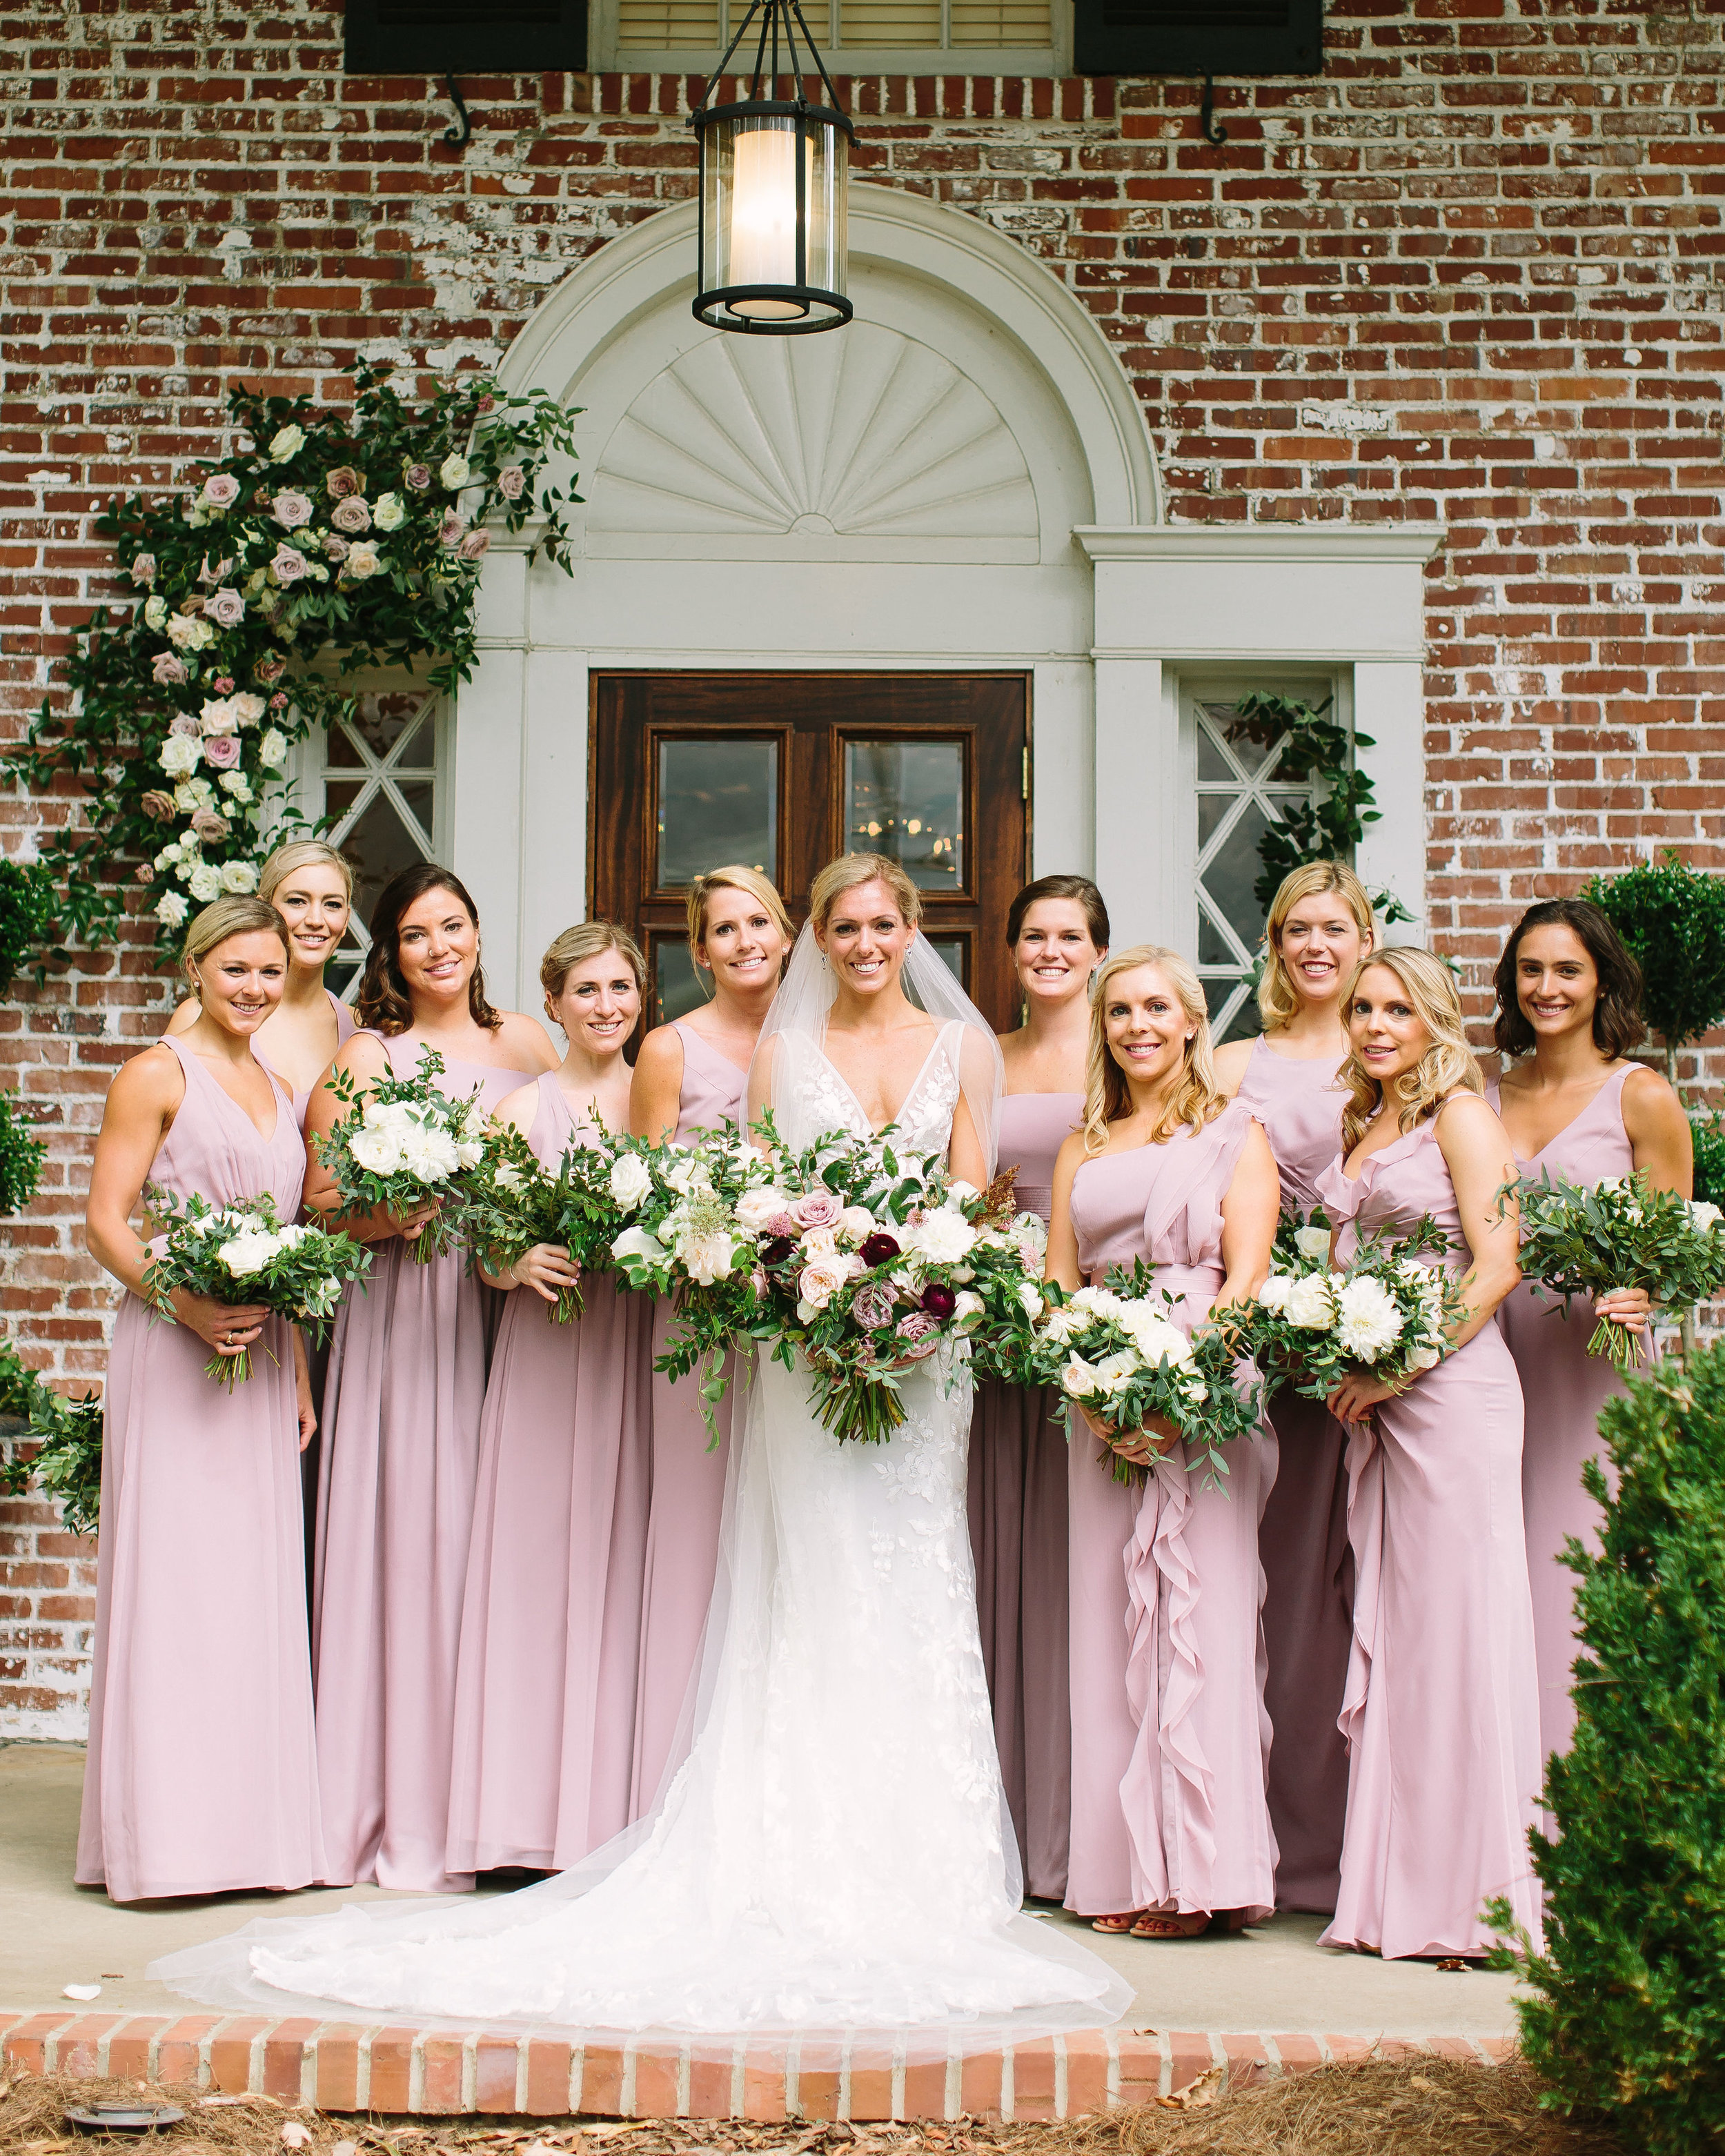 Dusty rose bridesmaid dresses with cream bouquet with lush greenery // Nashville Wedding Floral Design